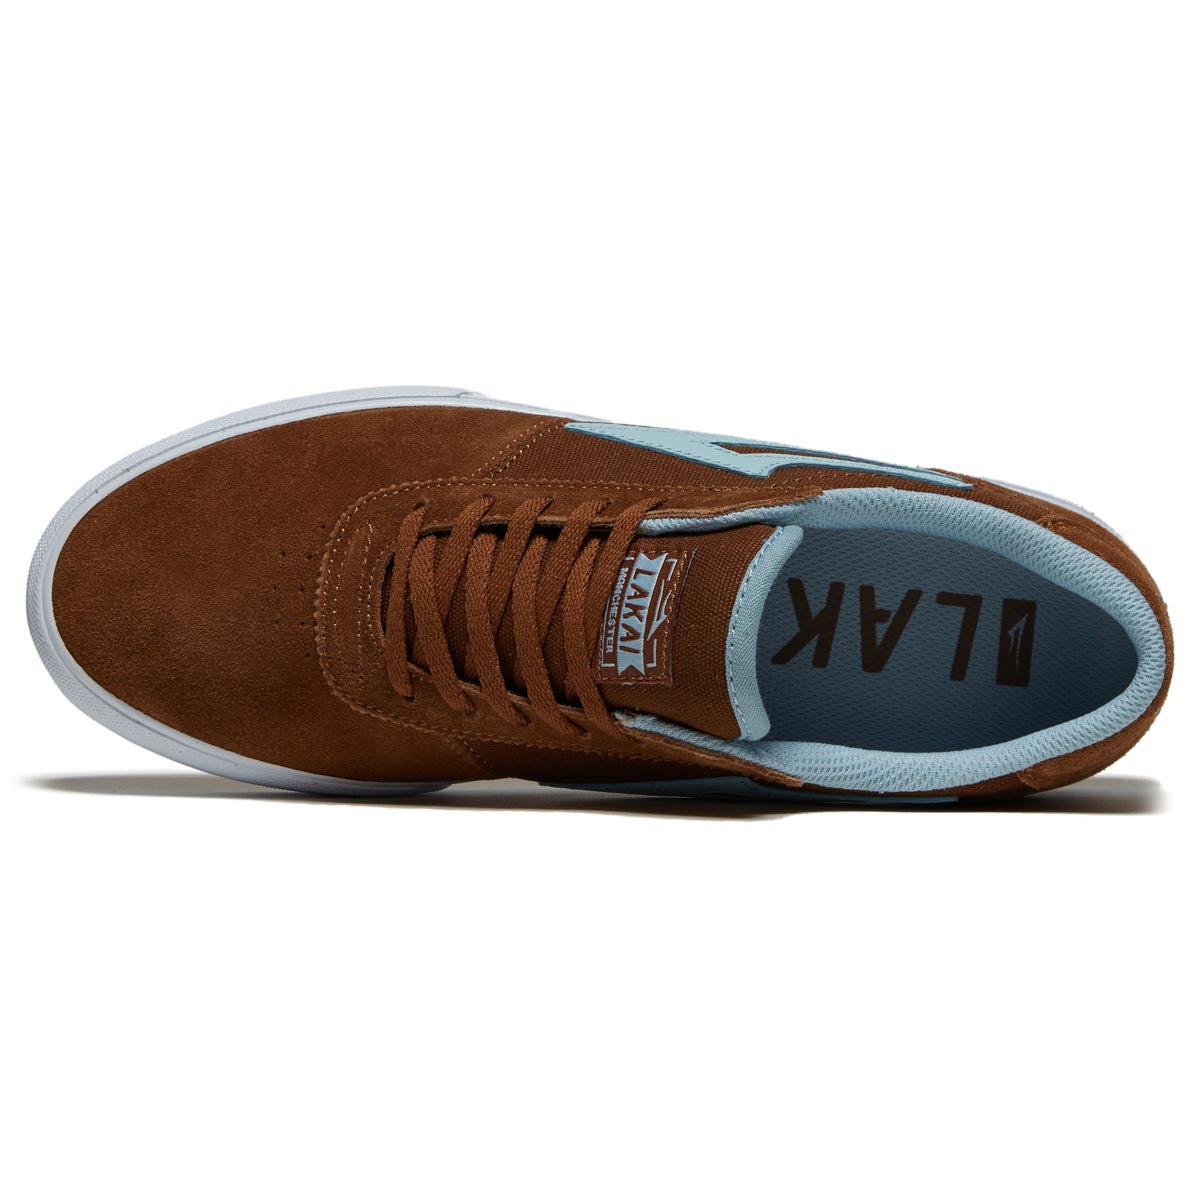 Lakai Manchester Shoes - Brown Suede image 3